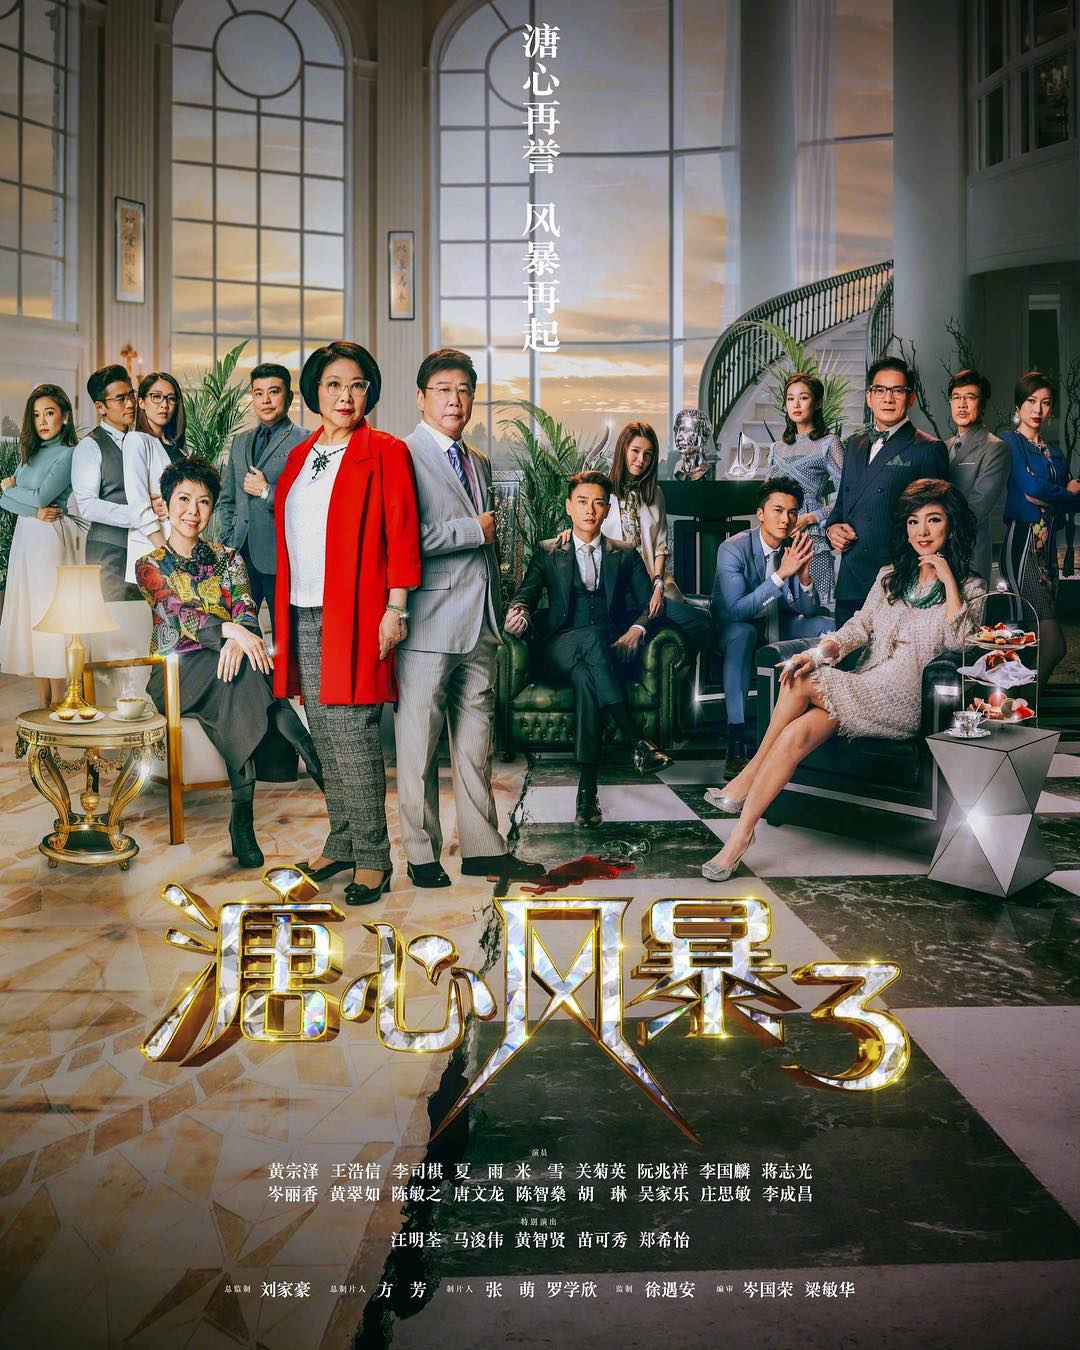 Heart and Greed 3 – 溏心風暴3 – Episode 18 (English subtitles)